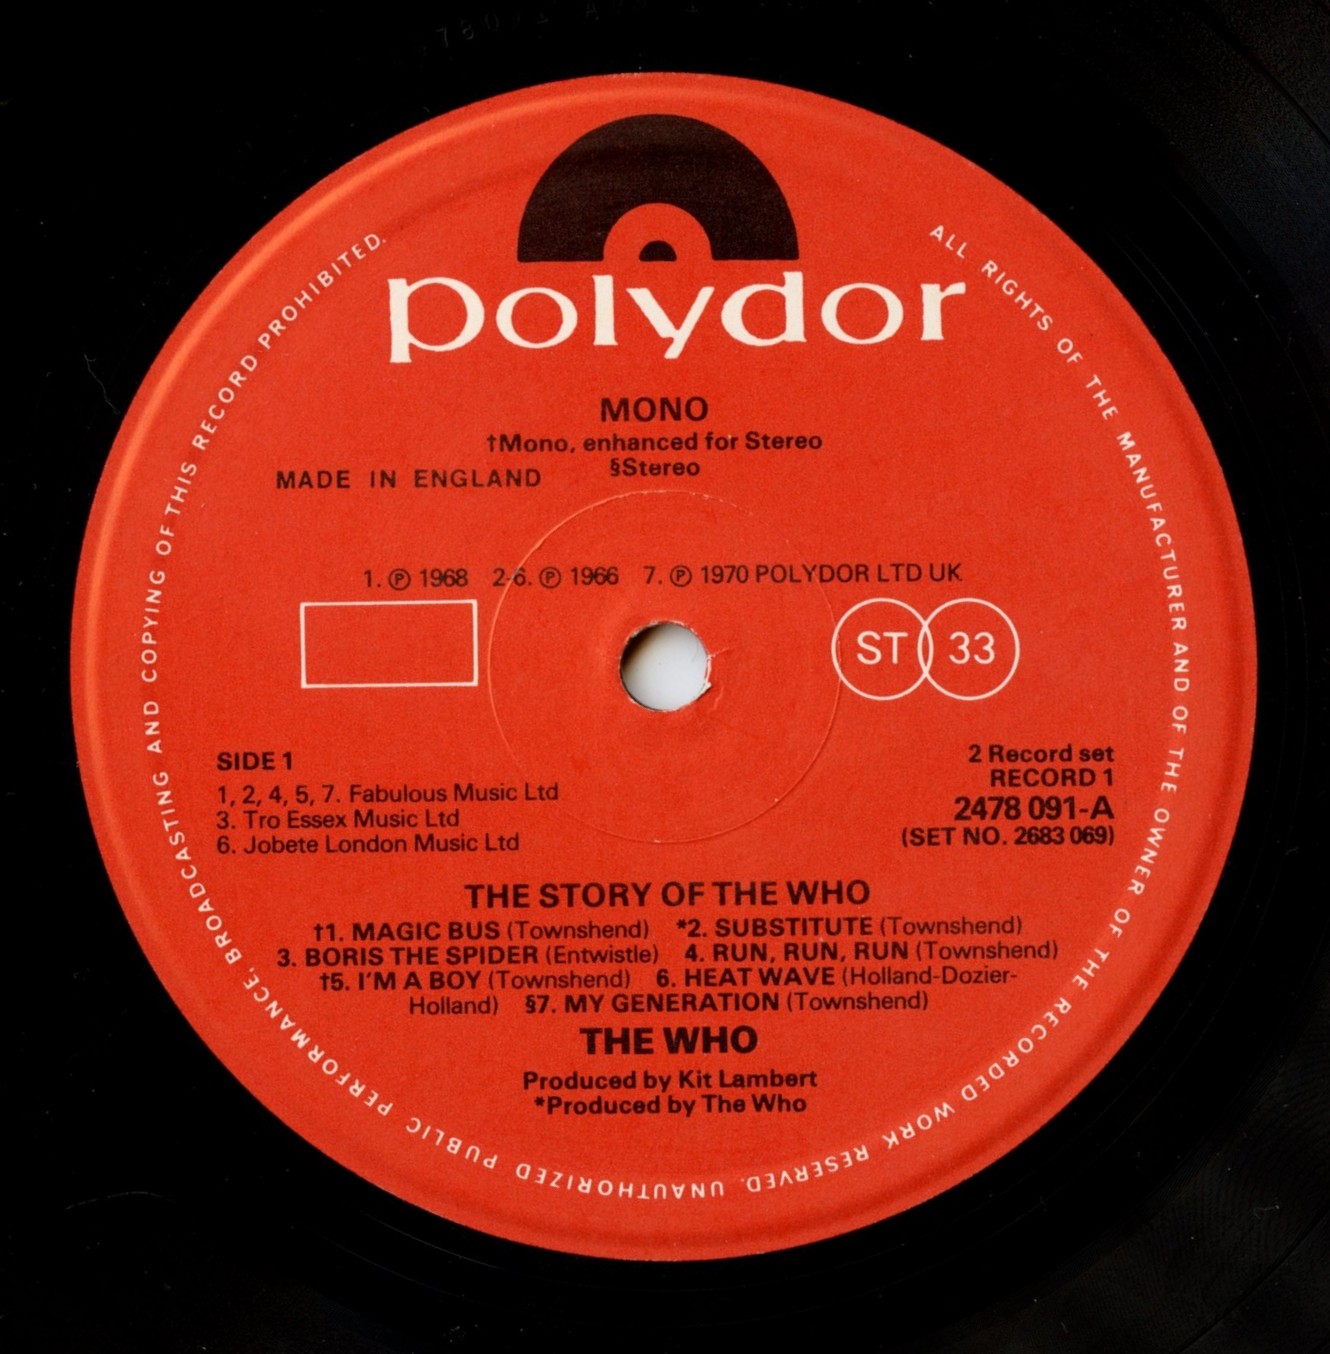 The Who ‎Vinyl The Story Of The Who 1976 UK pressing